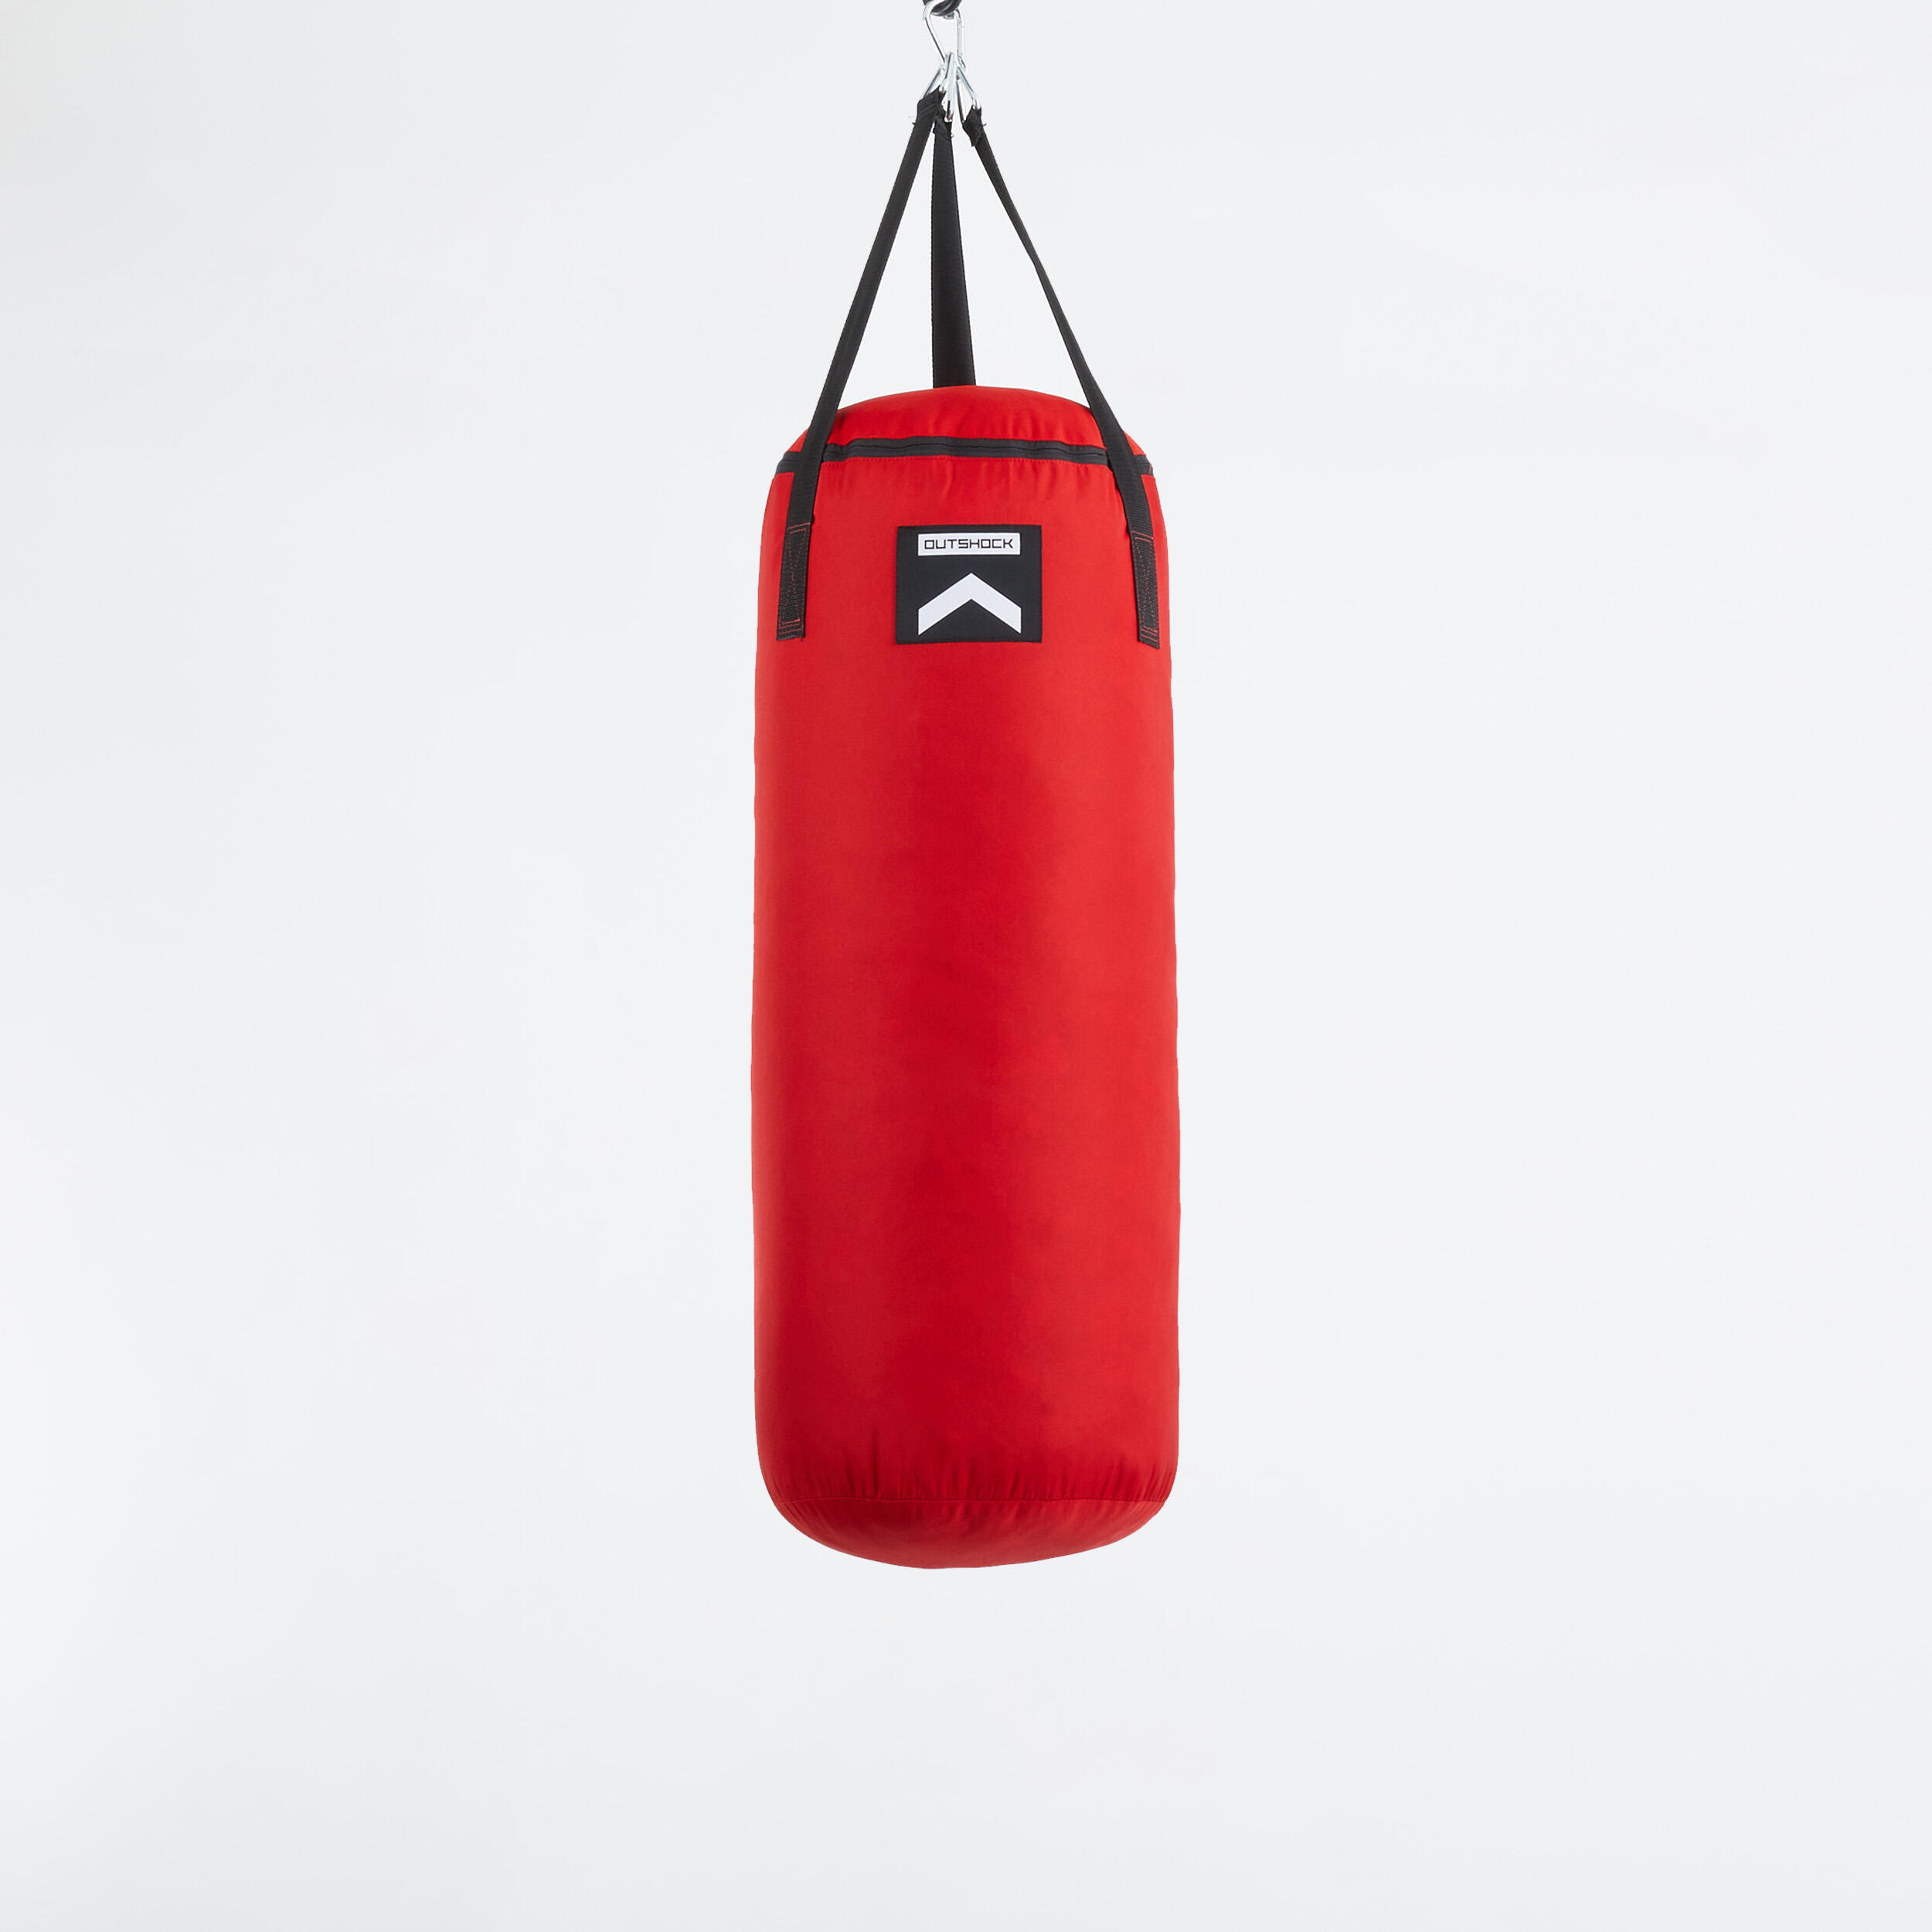 Punching Bag with Stand Heavy Sand Bag for Home Gym Boxing Workouts 220lb  Max | eBay